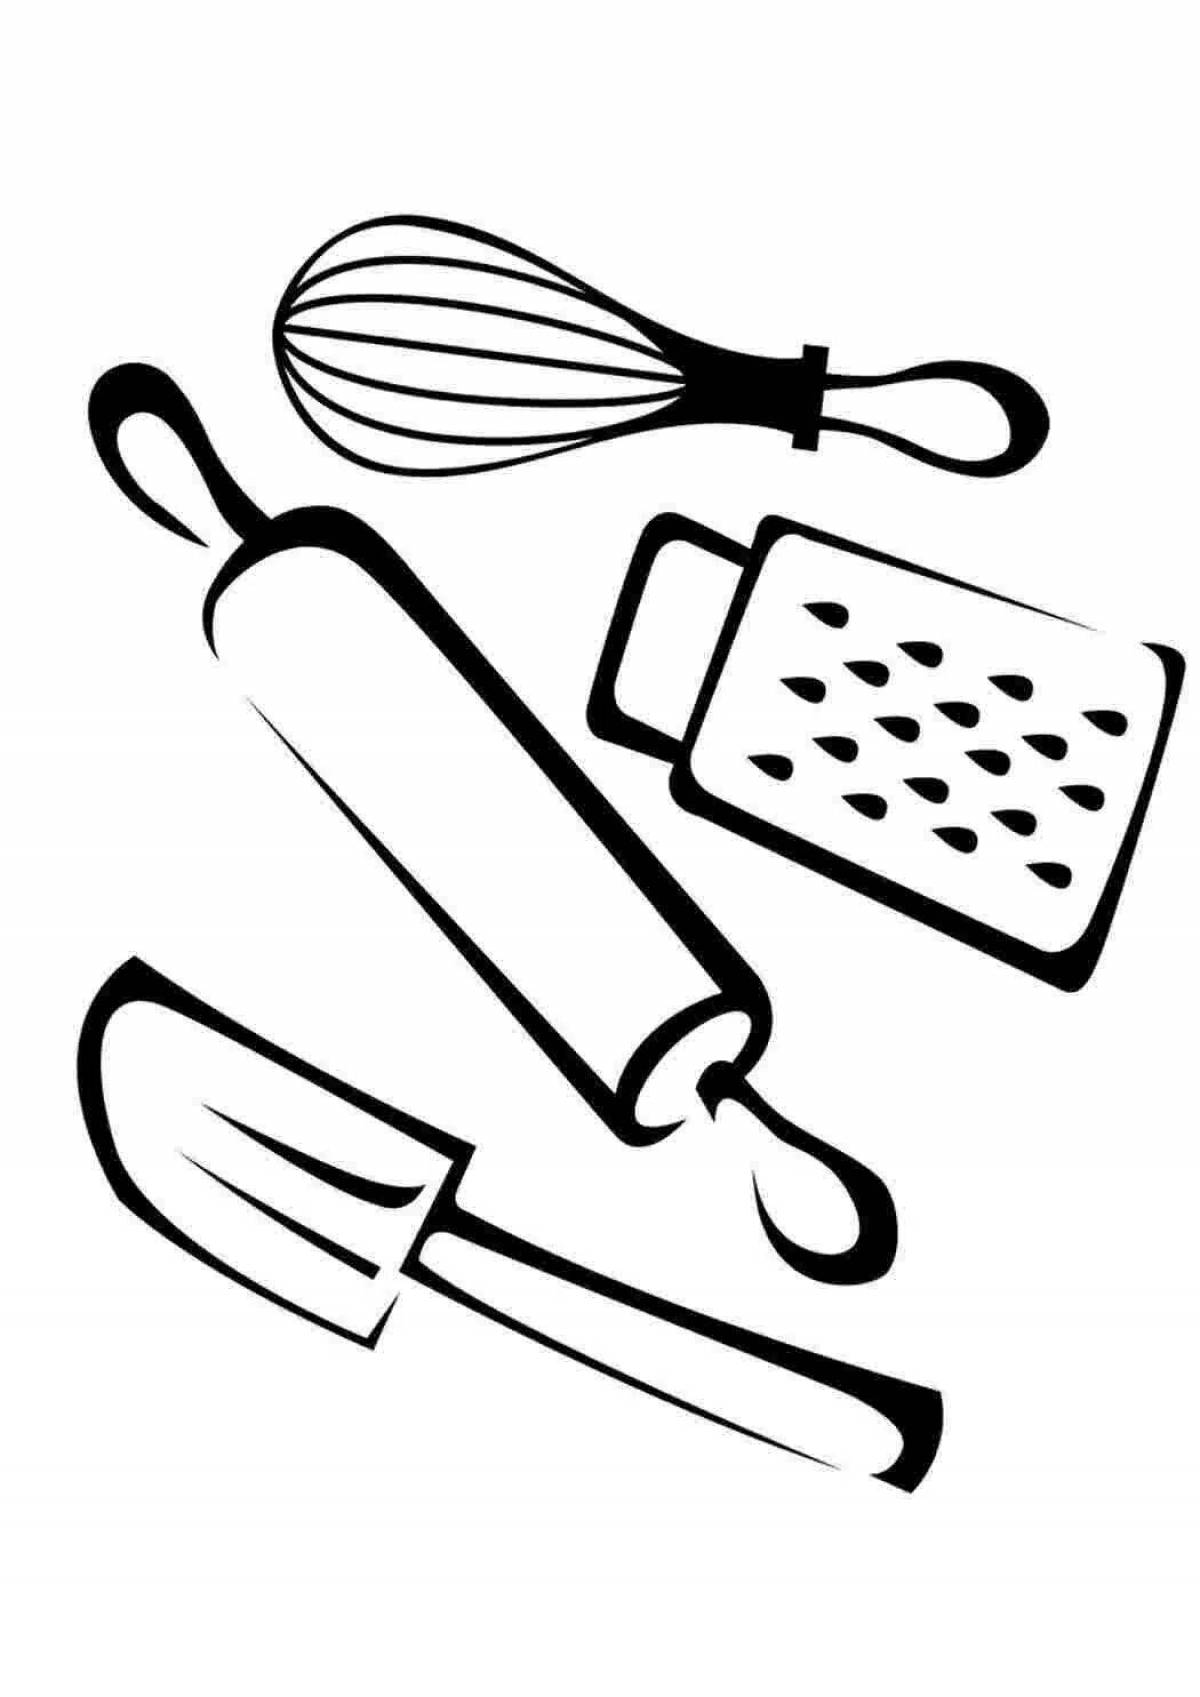 Adorable kitchen tools coloring book